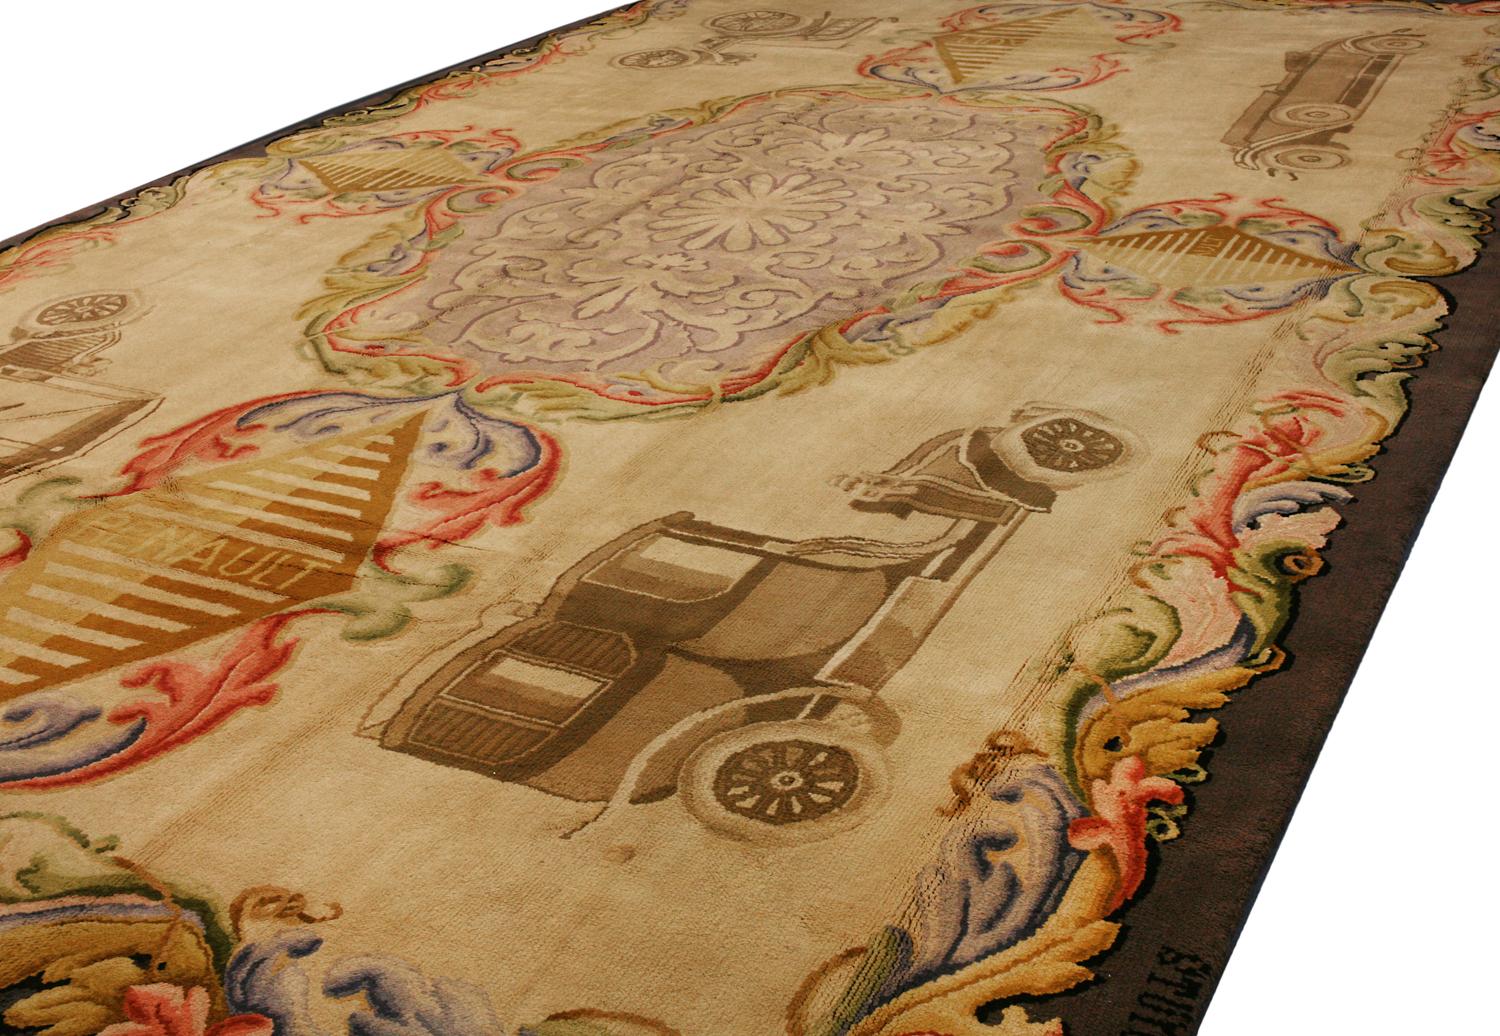 Alfonso XIII, was King of Spain from 1886 until 1931, he was looking for an extraordinary gift for a man who had everything in his life. He came across this original idea of giving an amazing carpet featuring the cars that bear name of Louis